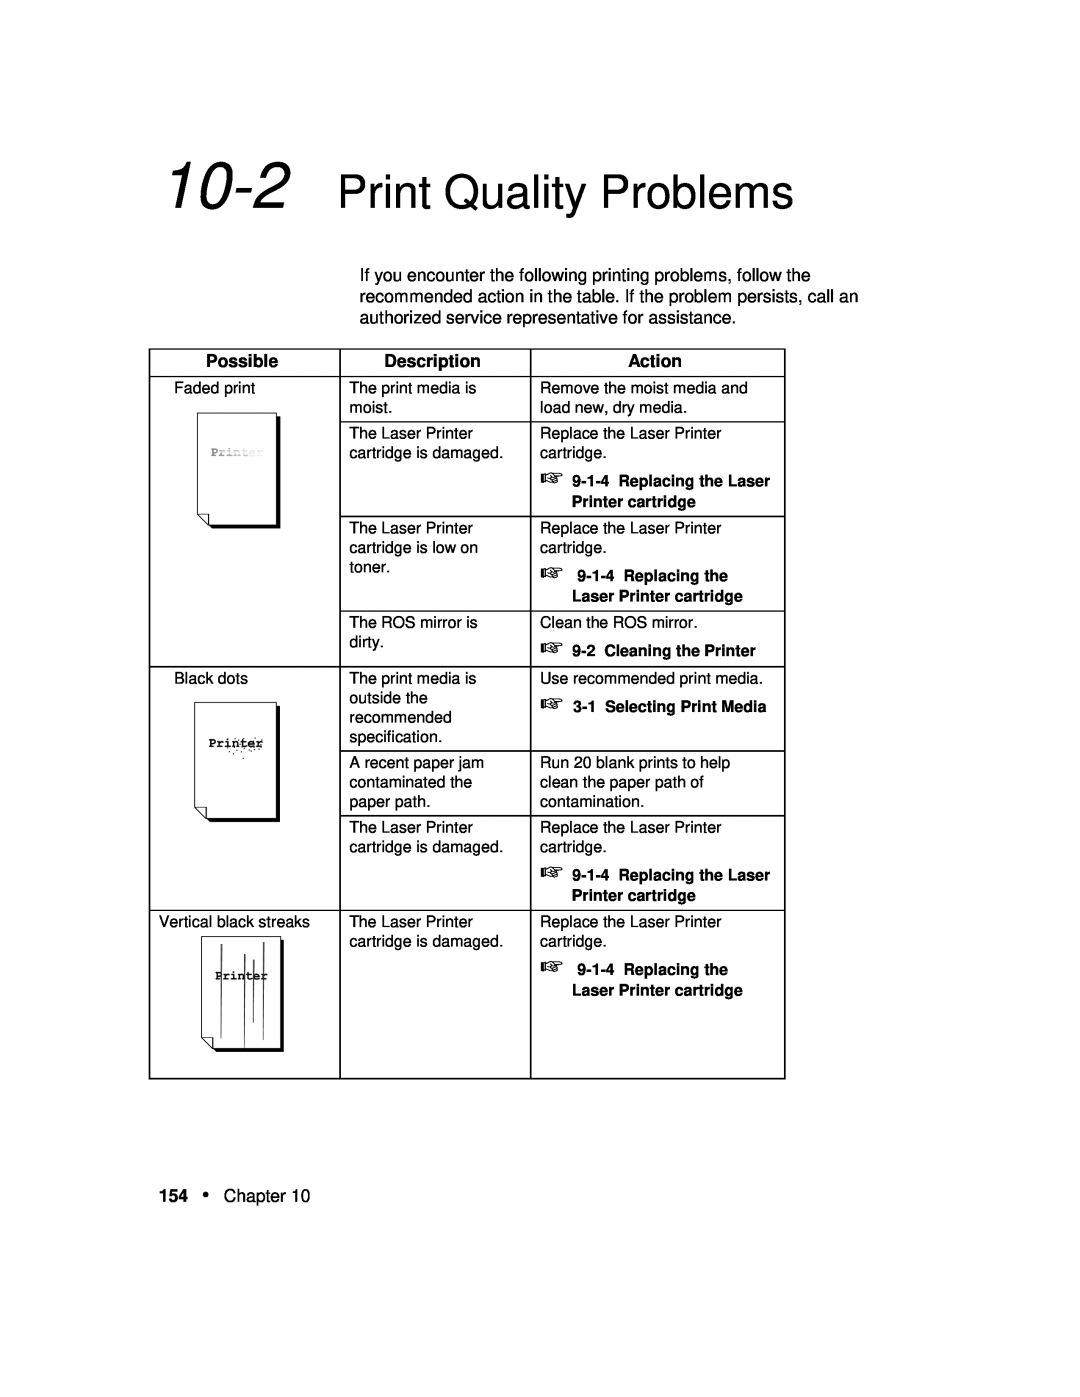 Xerox P12 manual Print Quality Problems, Possible, Description, Action, Replacing the Laser, Printer cartridge 